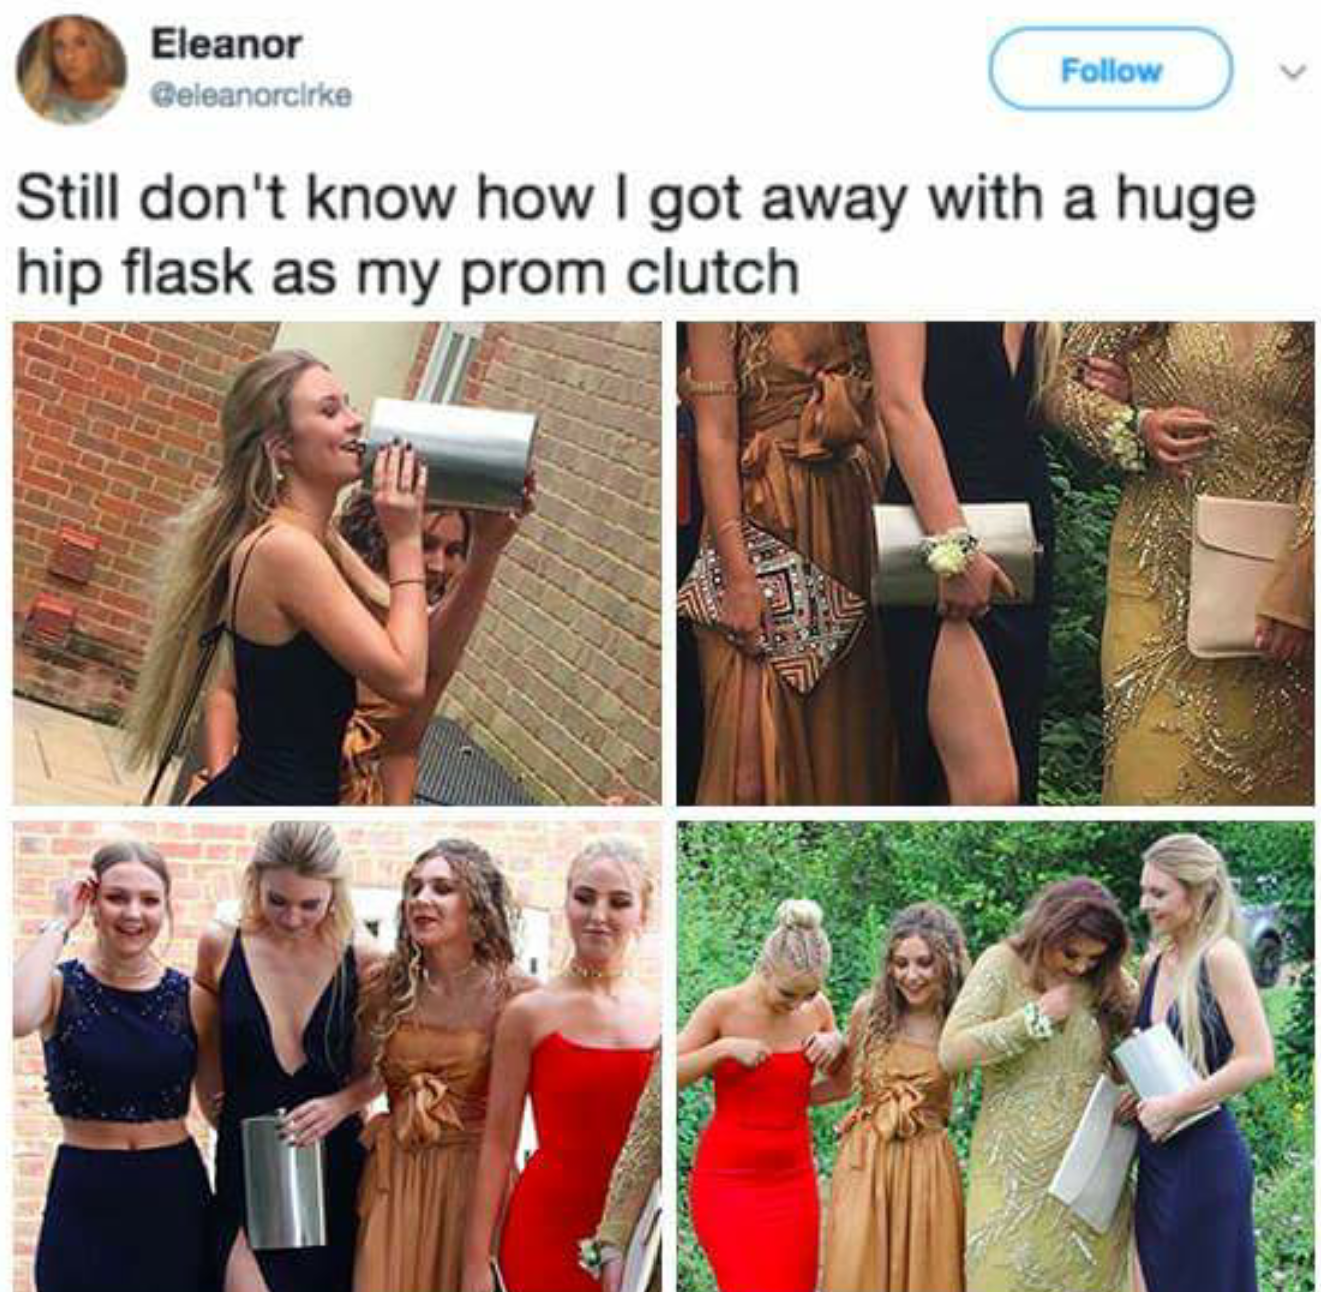 Prom clutch of huge hip flask and it is hard to notice